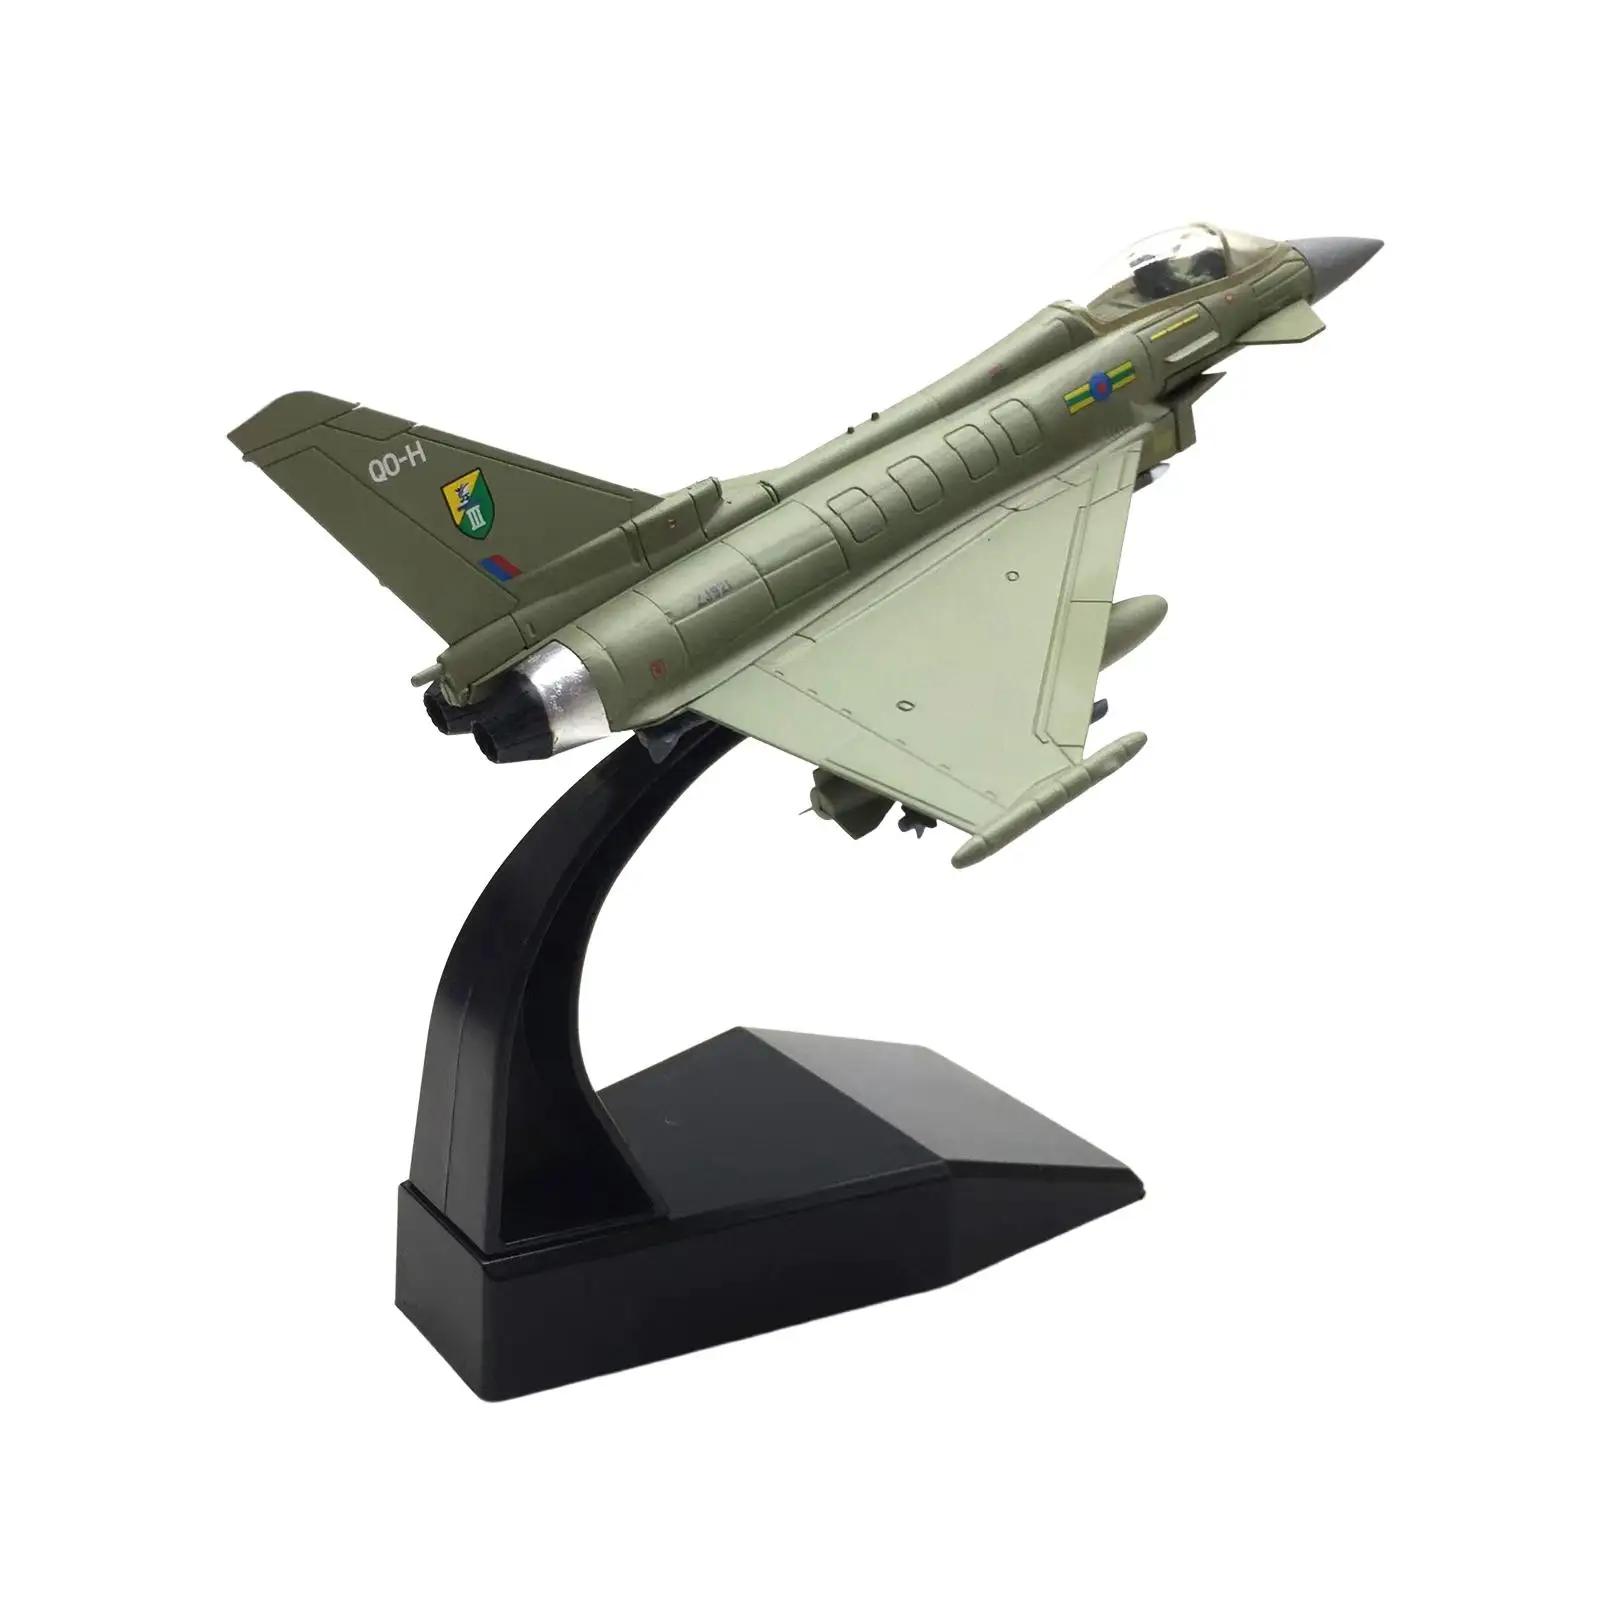 

Diecast Aircraft Plane Ef 2000 Mini Diecast Aviation Plane Model Toy Diecast Plane Model Mini aircraft for Gift